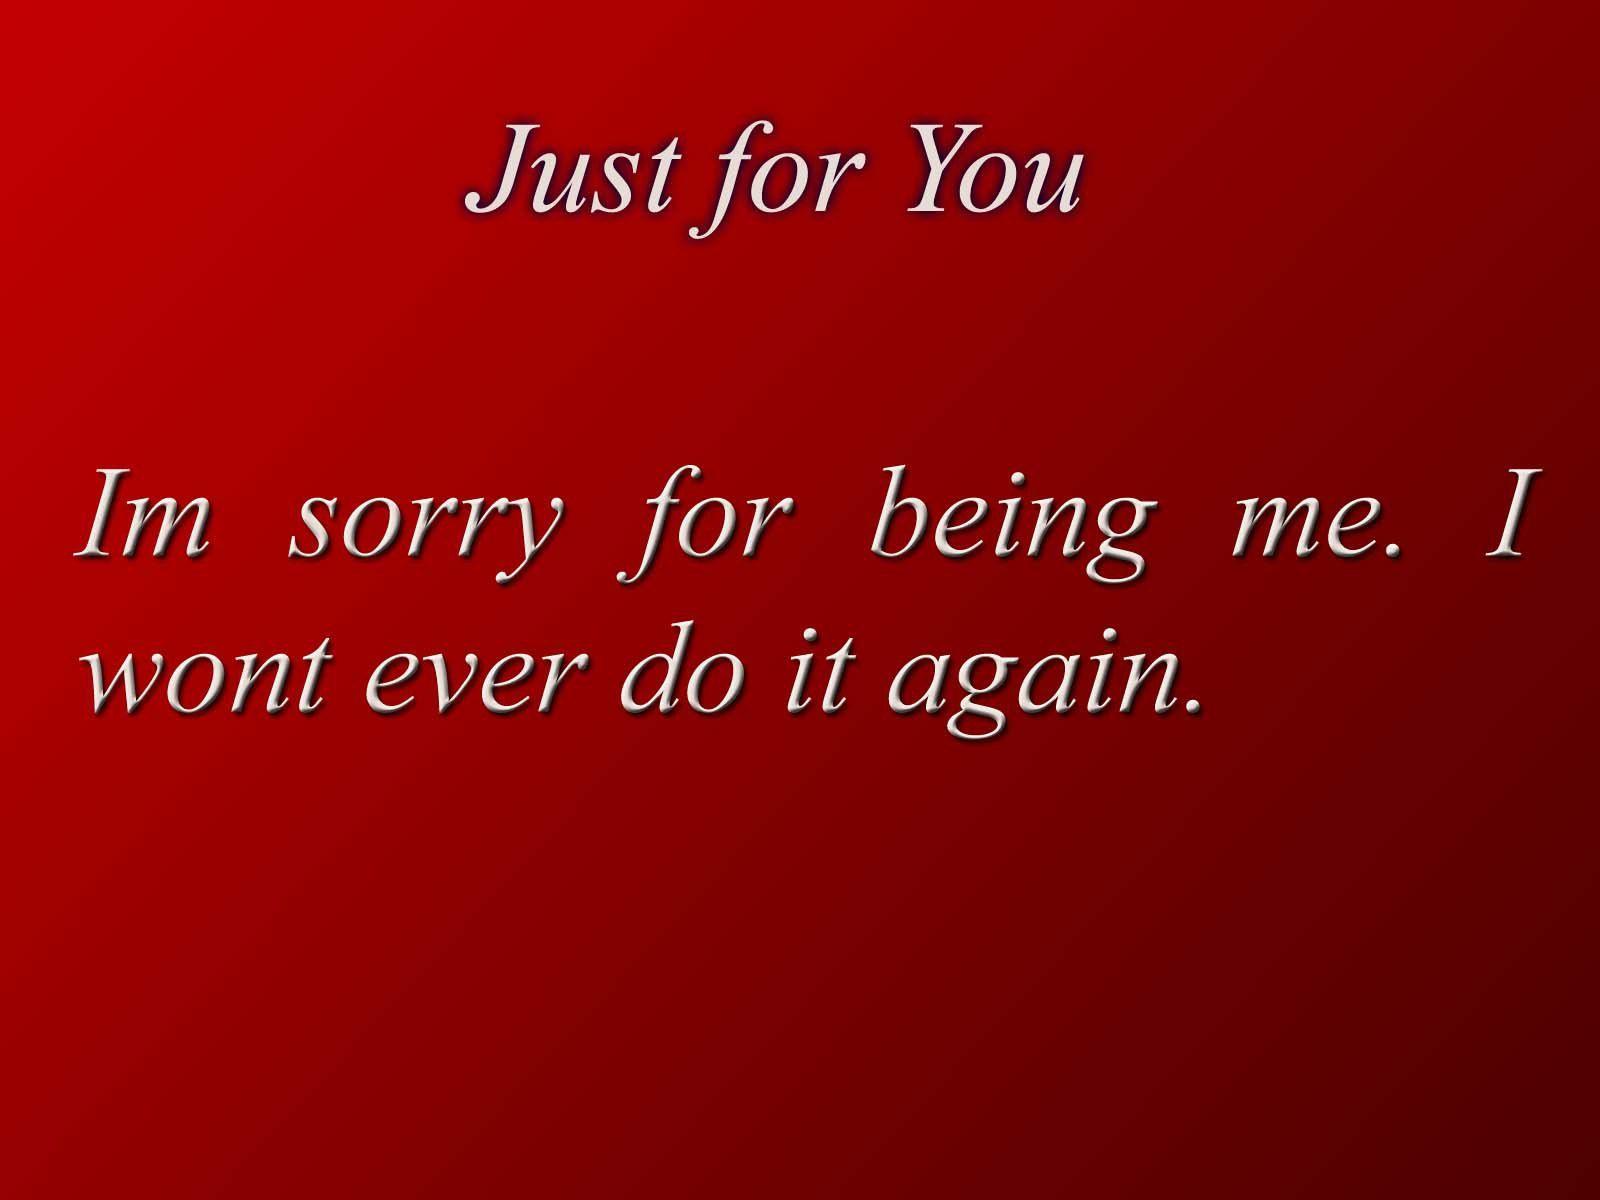 Sorry wallpaper for love girlfriend free download 1080p HD